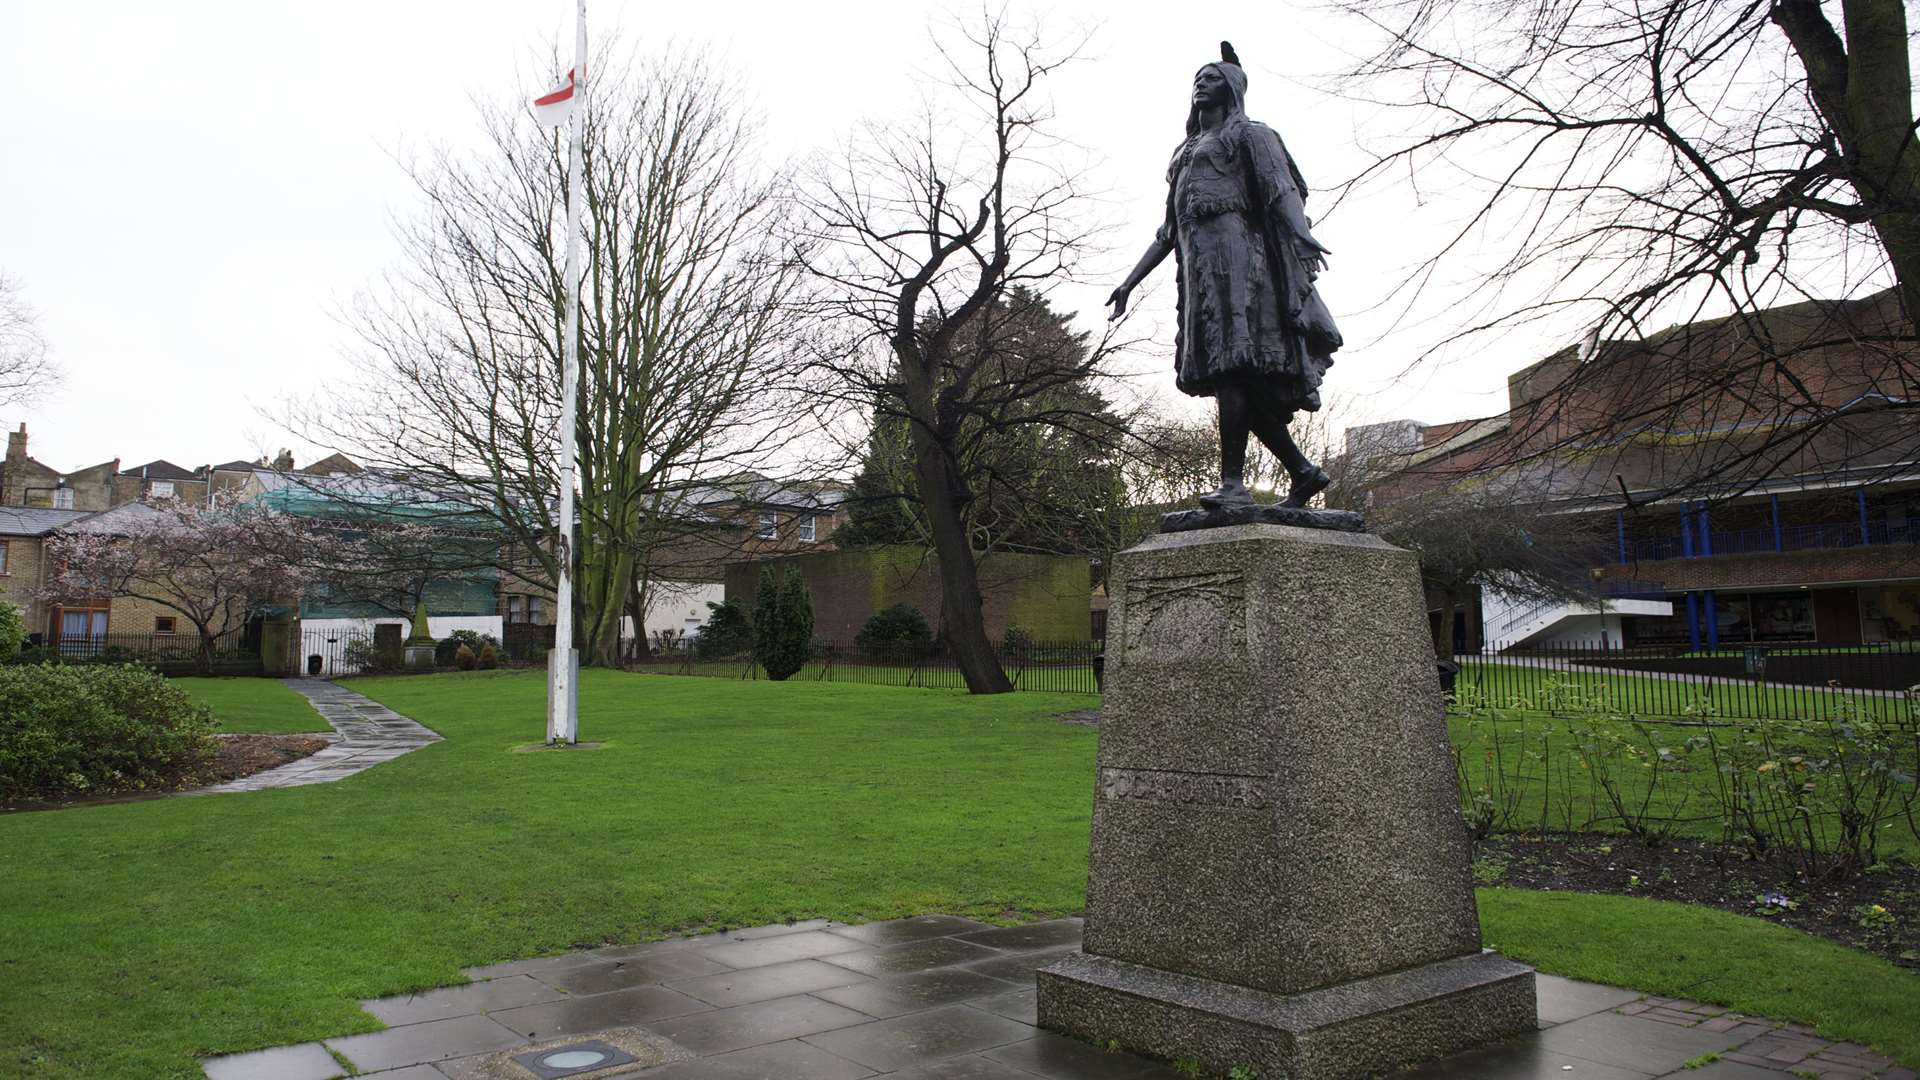 The statue of Native American princess, Pocahontas, in the grounds of St George's Church, Gravesend